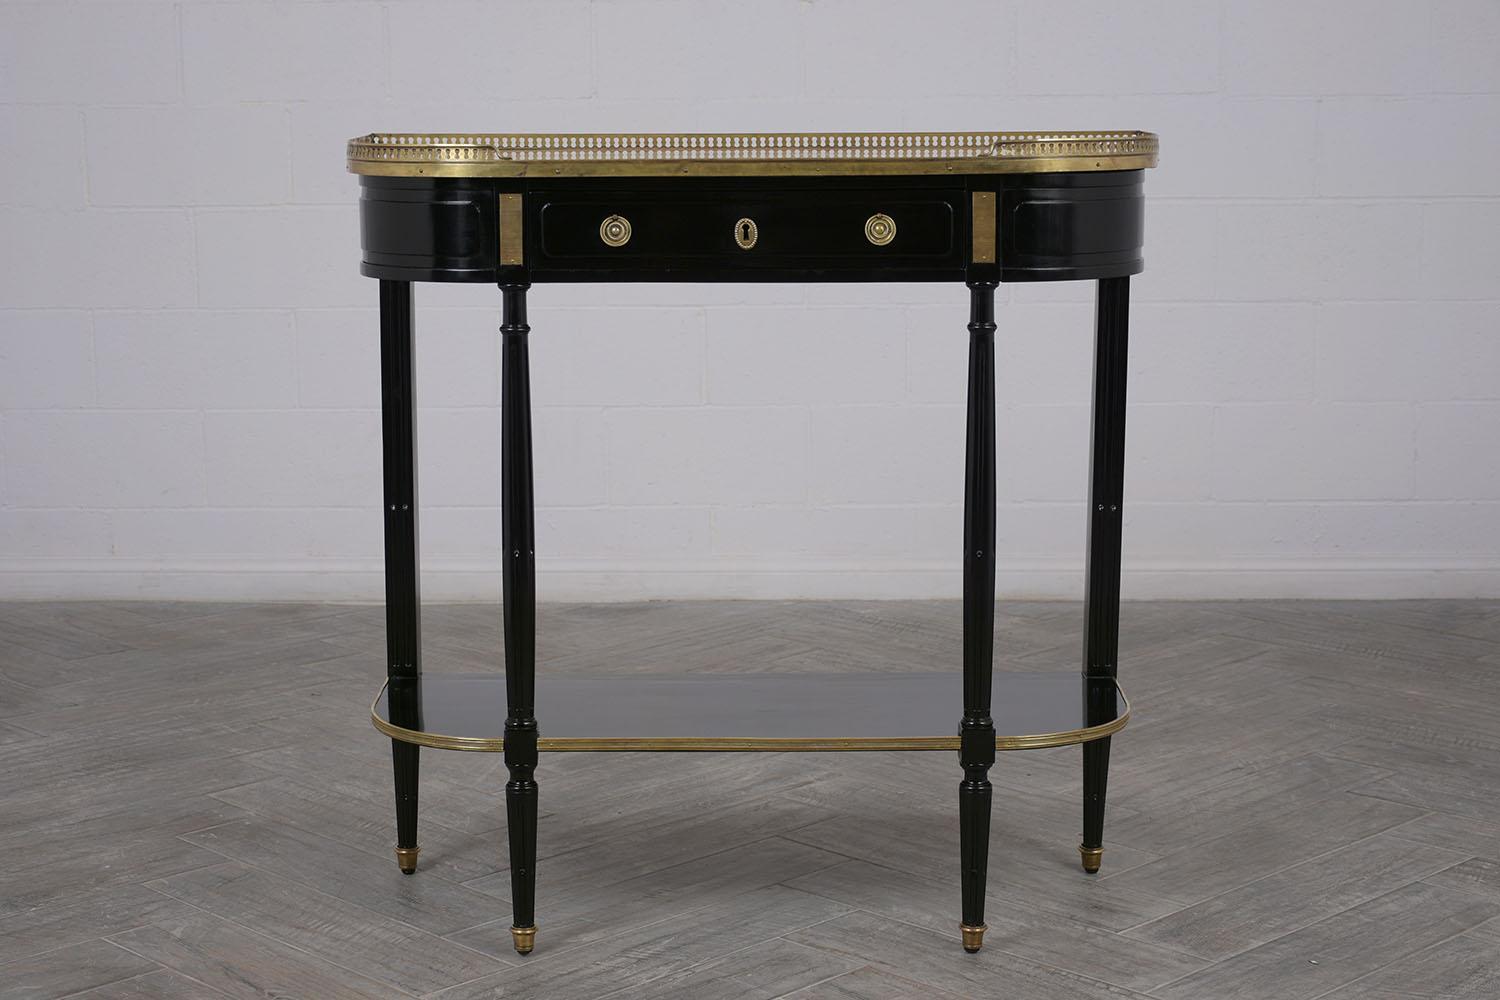 This elegant Louis XVI style demilune console table features an ebonized finish with a brass gallery that surrounds the ivory colored marble top. The single drawer has double brass pulls with working lock and key. The console has sturdy carved legs